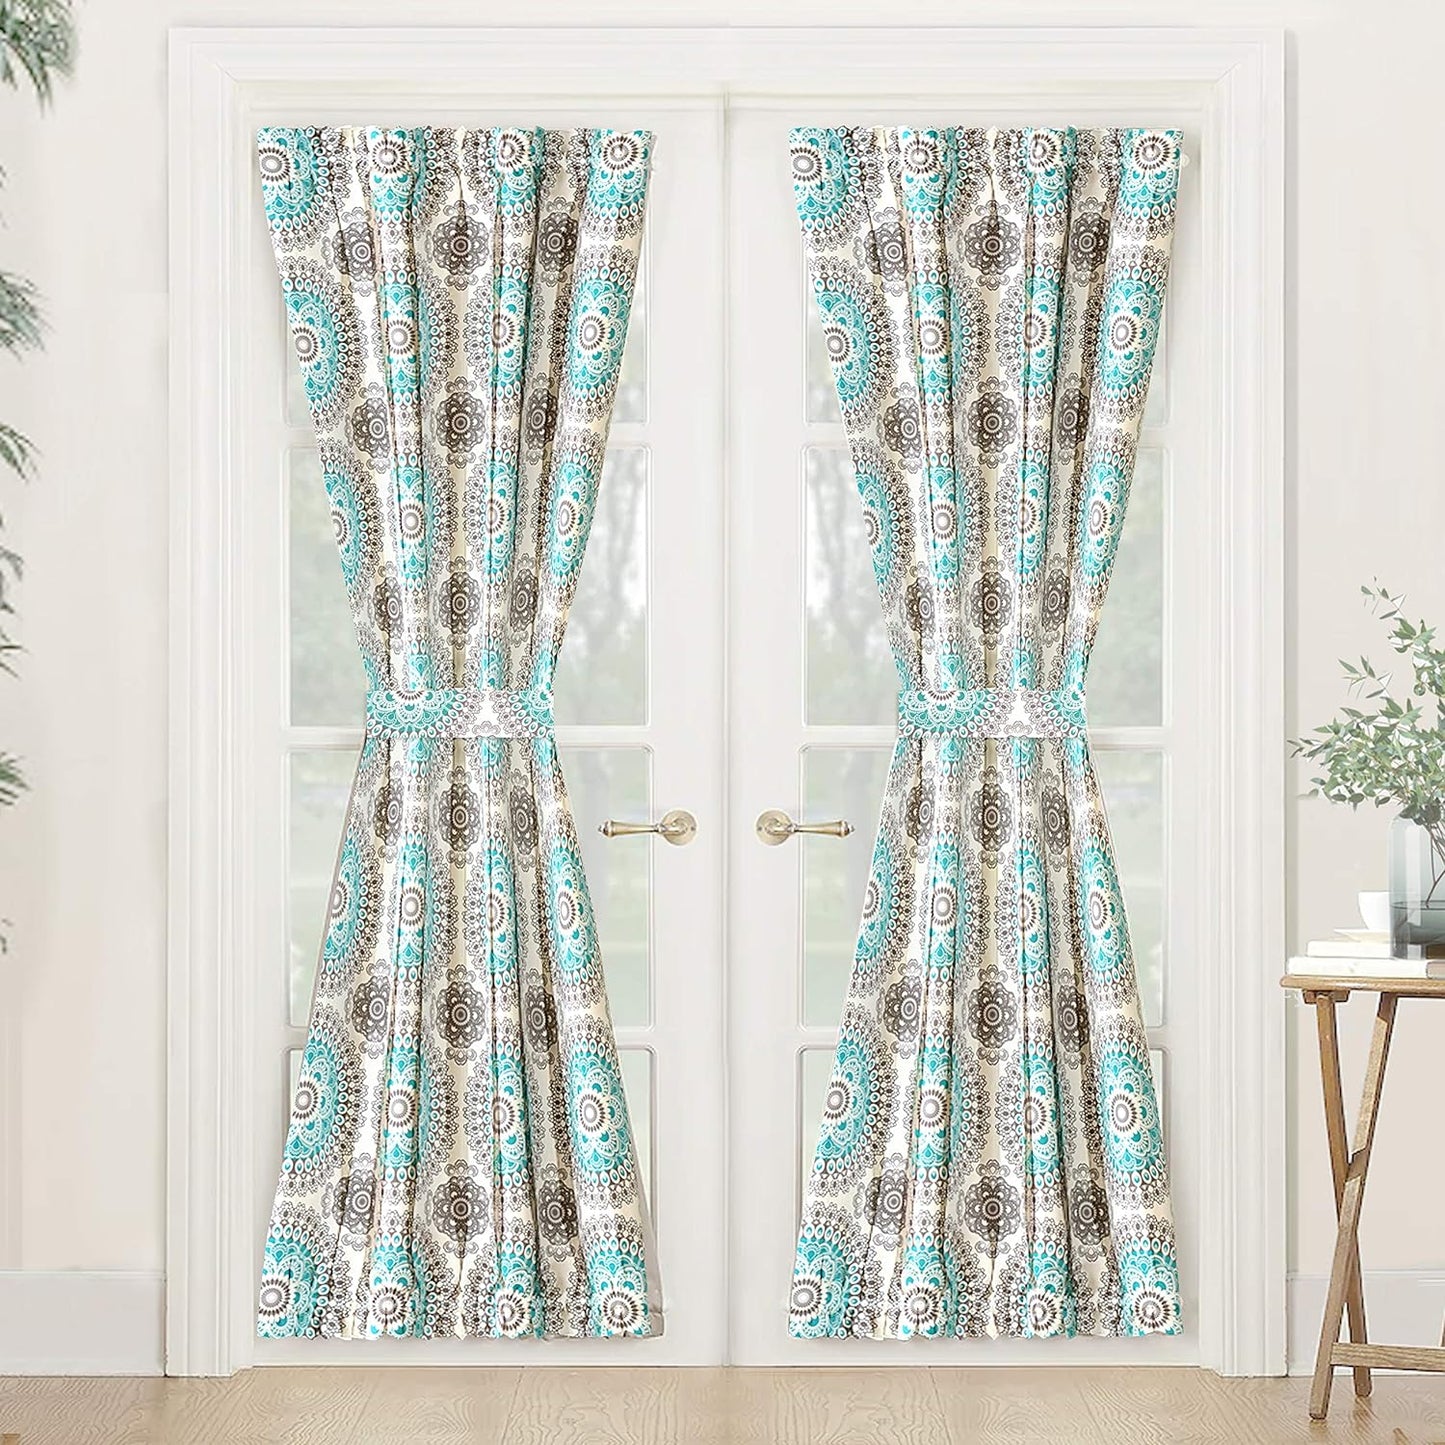 Driftaway Curtains for Bedroom Room Darkening Curtain 25 Inch by 72 Inch Medallion Drapes for French Door Windows Boho Damask Pattern Sidelight Curtain for Front Door Single Panel Aqua and Gray  DriftAway Aqua/Grey (2)52"X72" | Door Panel 